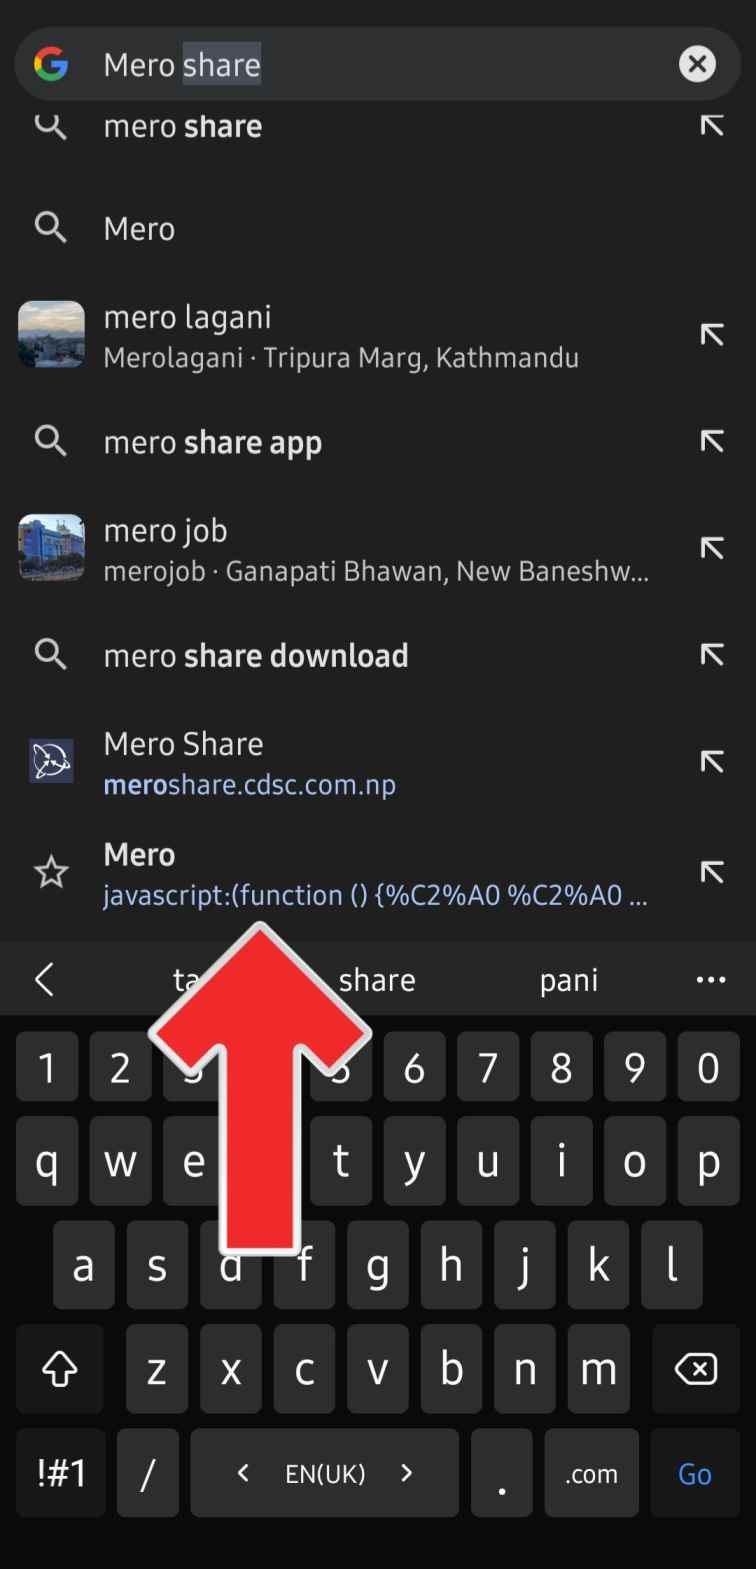 Steps 5 2 to Recover Get Lost Forgotten CRN Number in Mero Share Mobile